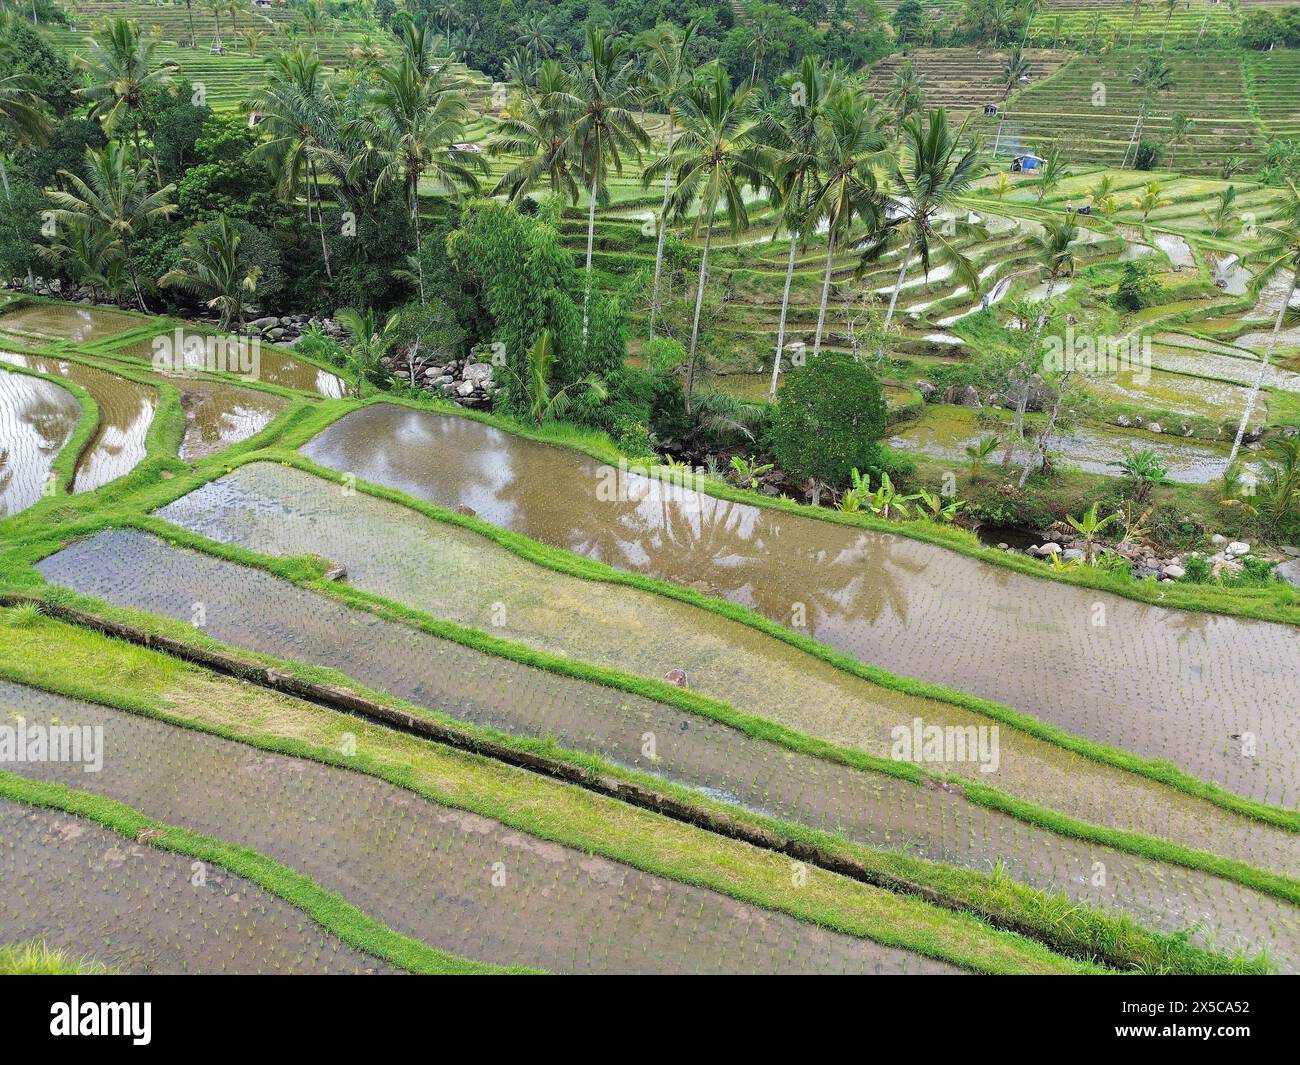 Tropical agriculture - Jatiluwih Rice Terraces, Bali, Indonesia Stock Photo